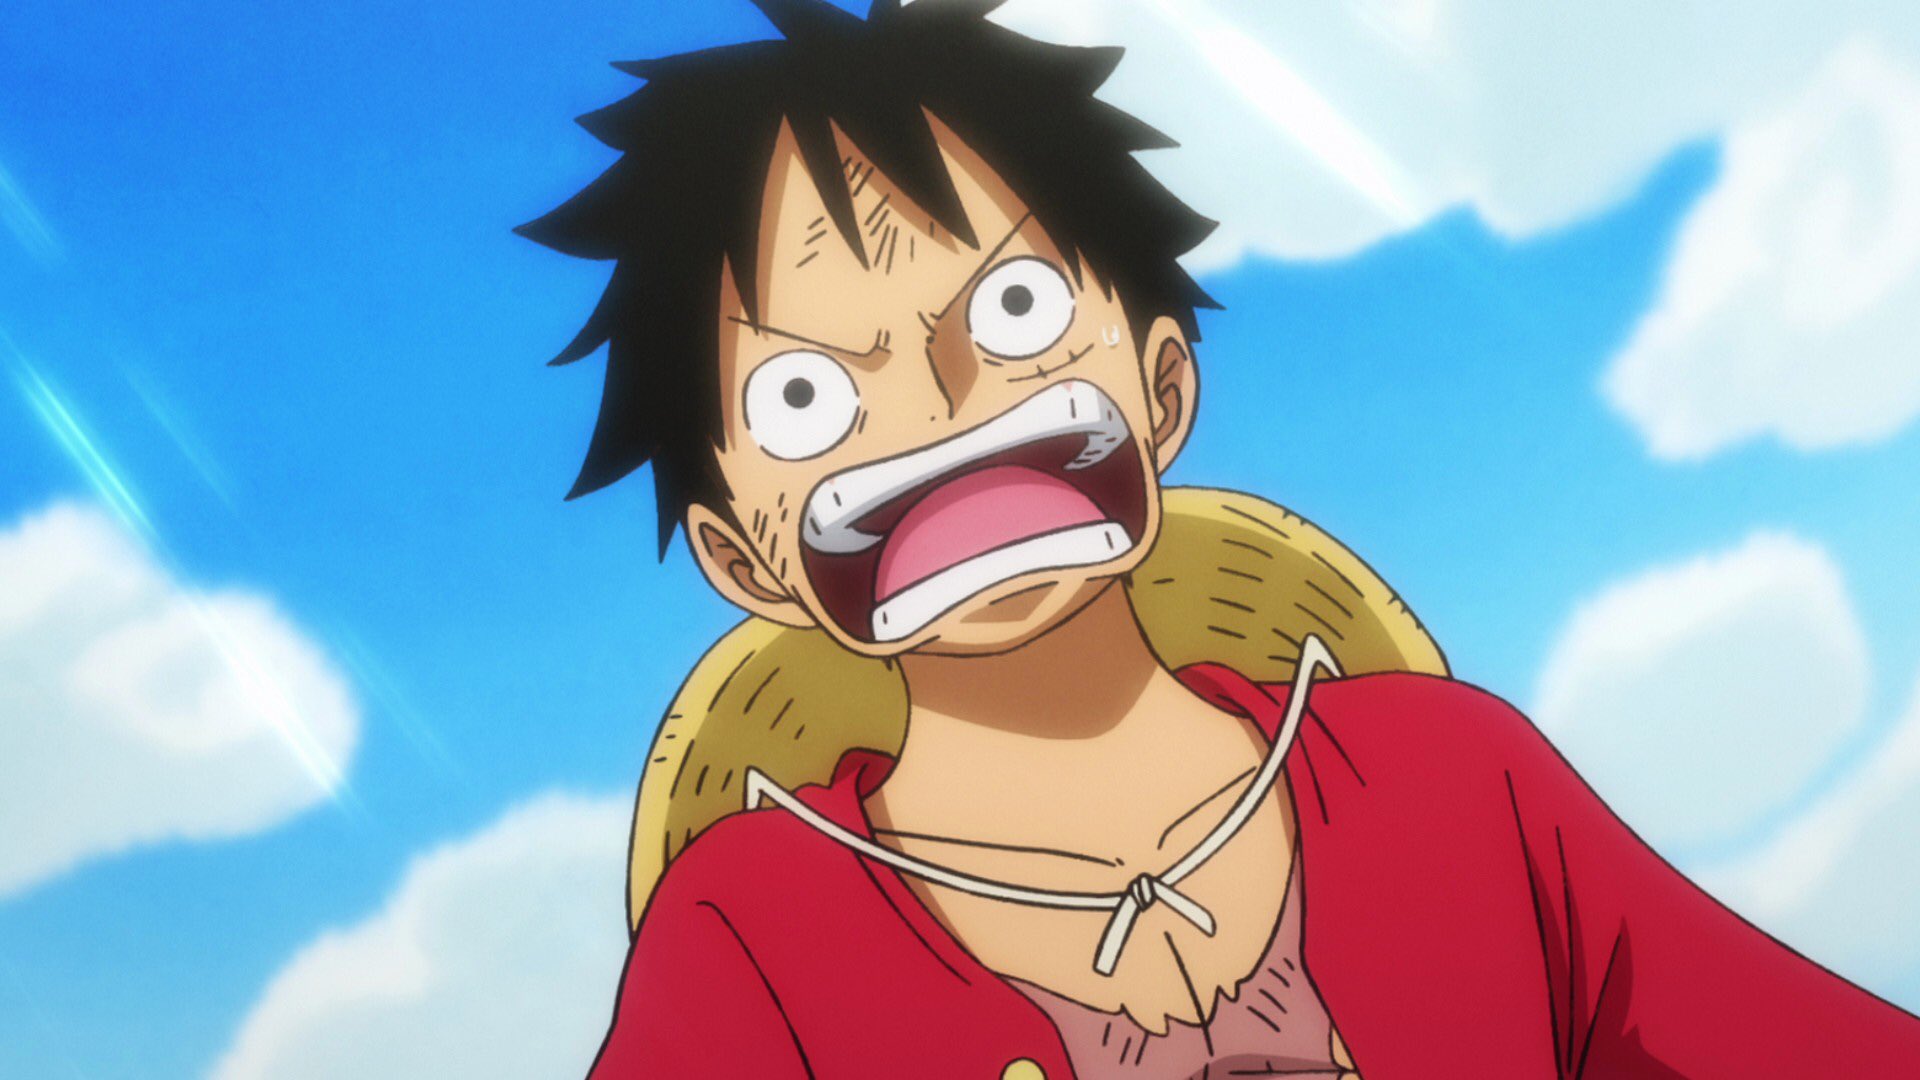 Twitter पर One Piece スタッフ 公式 Official ご視聴ありがとうございました 見逃し配信は Tver Fodにて ワンピース 2 ワノ国 桜舞うサムライの国へ Tver ワンピース T Co 9ljch1mlvz Onepiece ワノ国 T Co Rp76ogleku